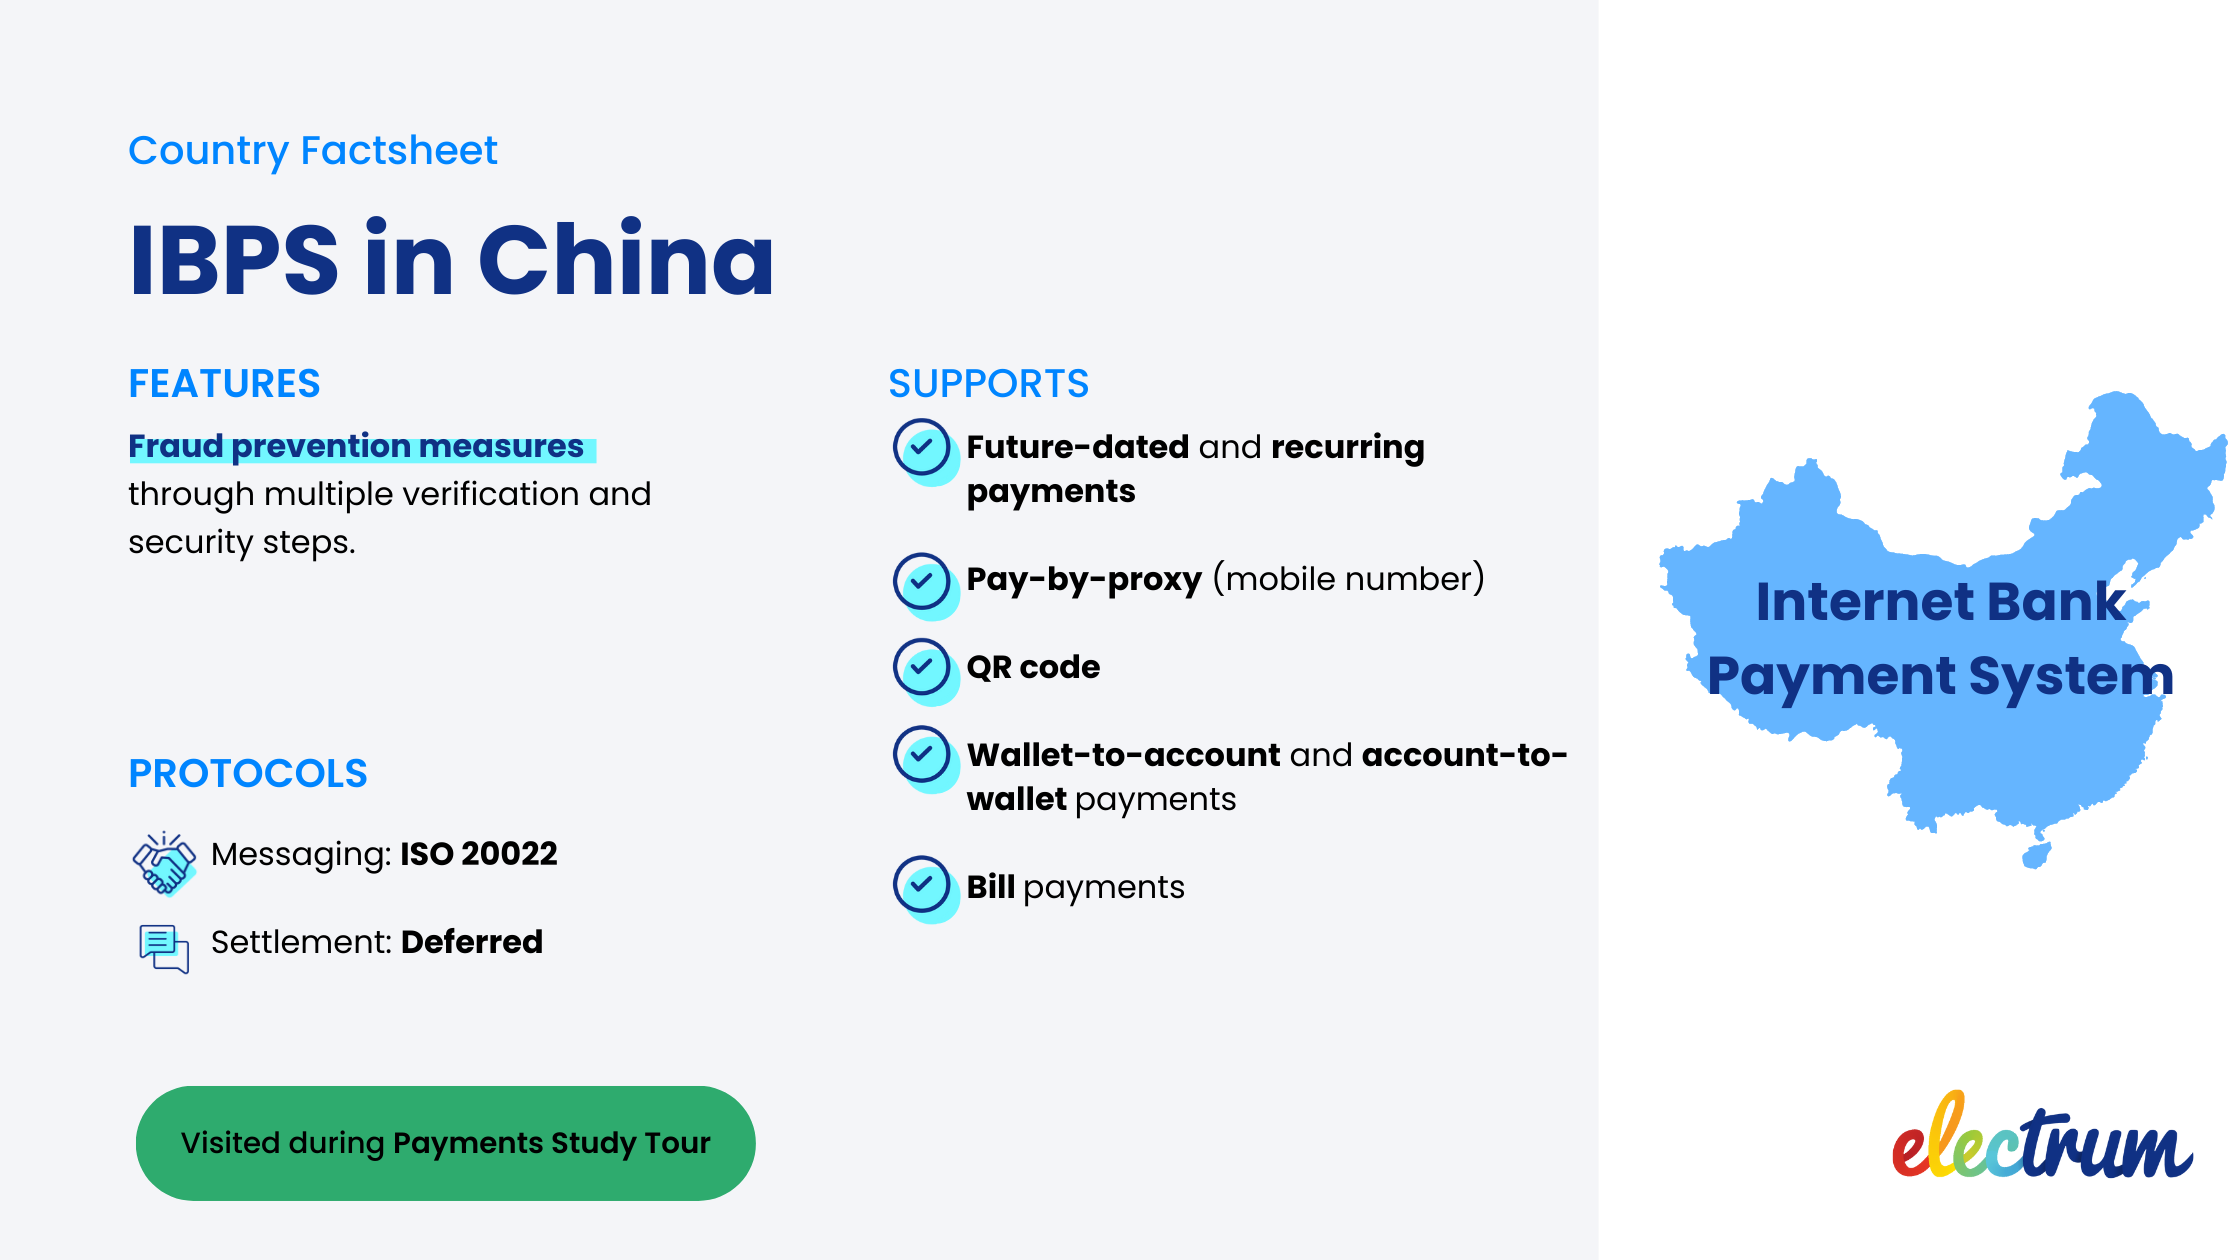 Factsheet summarising the Internet Bank Payment System in China